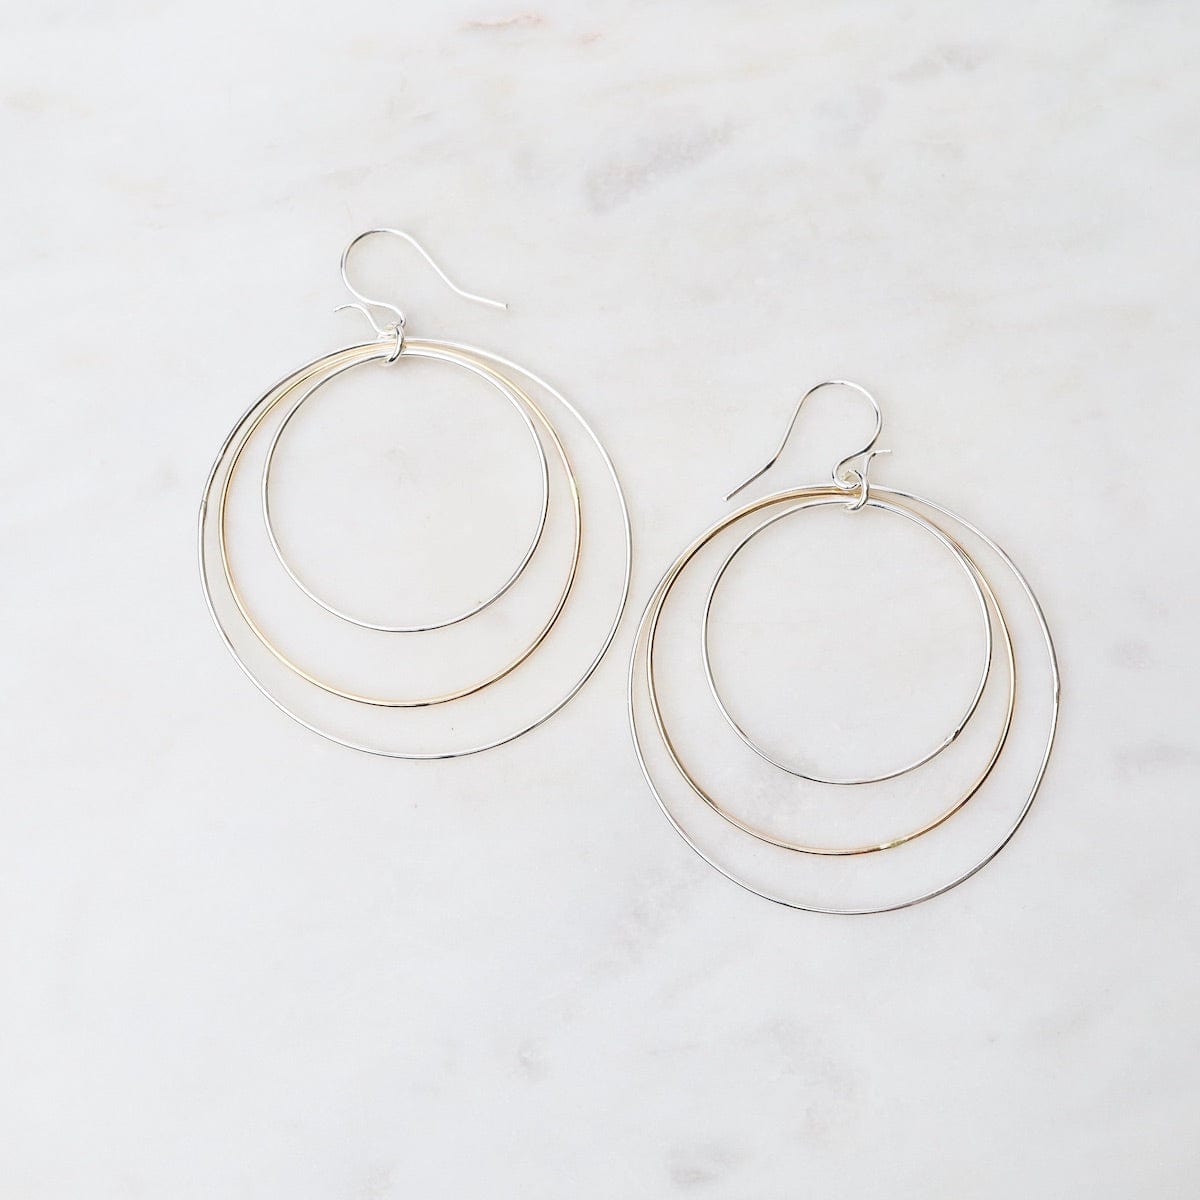 EAR Three Circles Large Earrings in Sterling Silver & Gold Fill